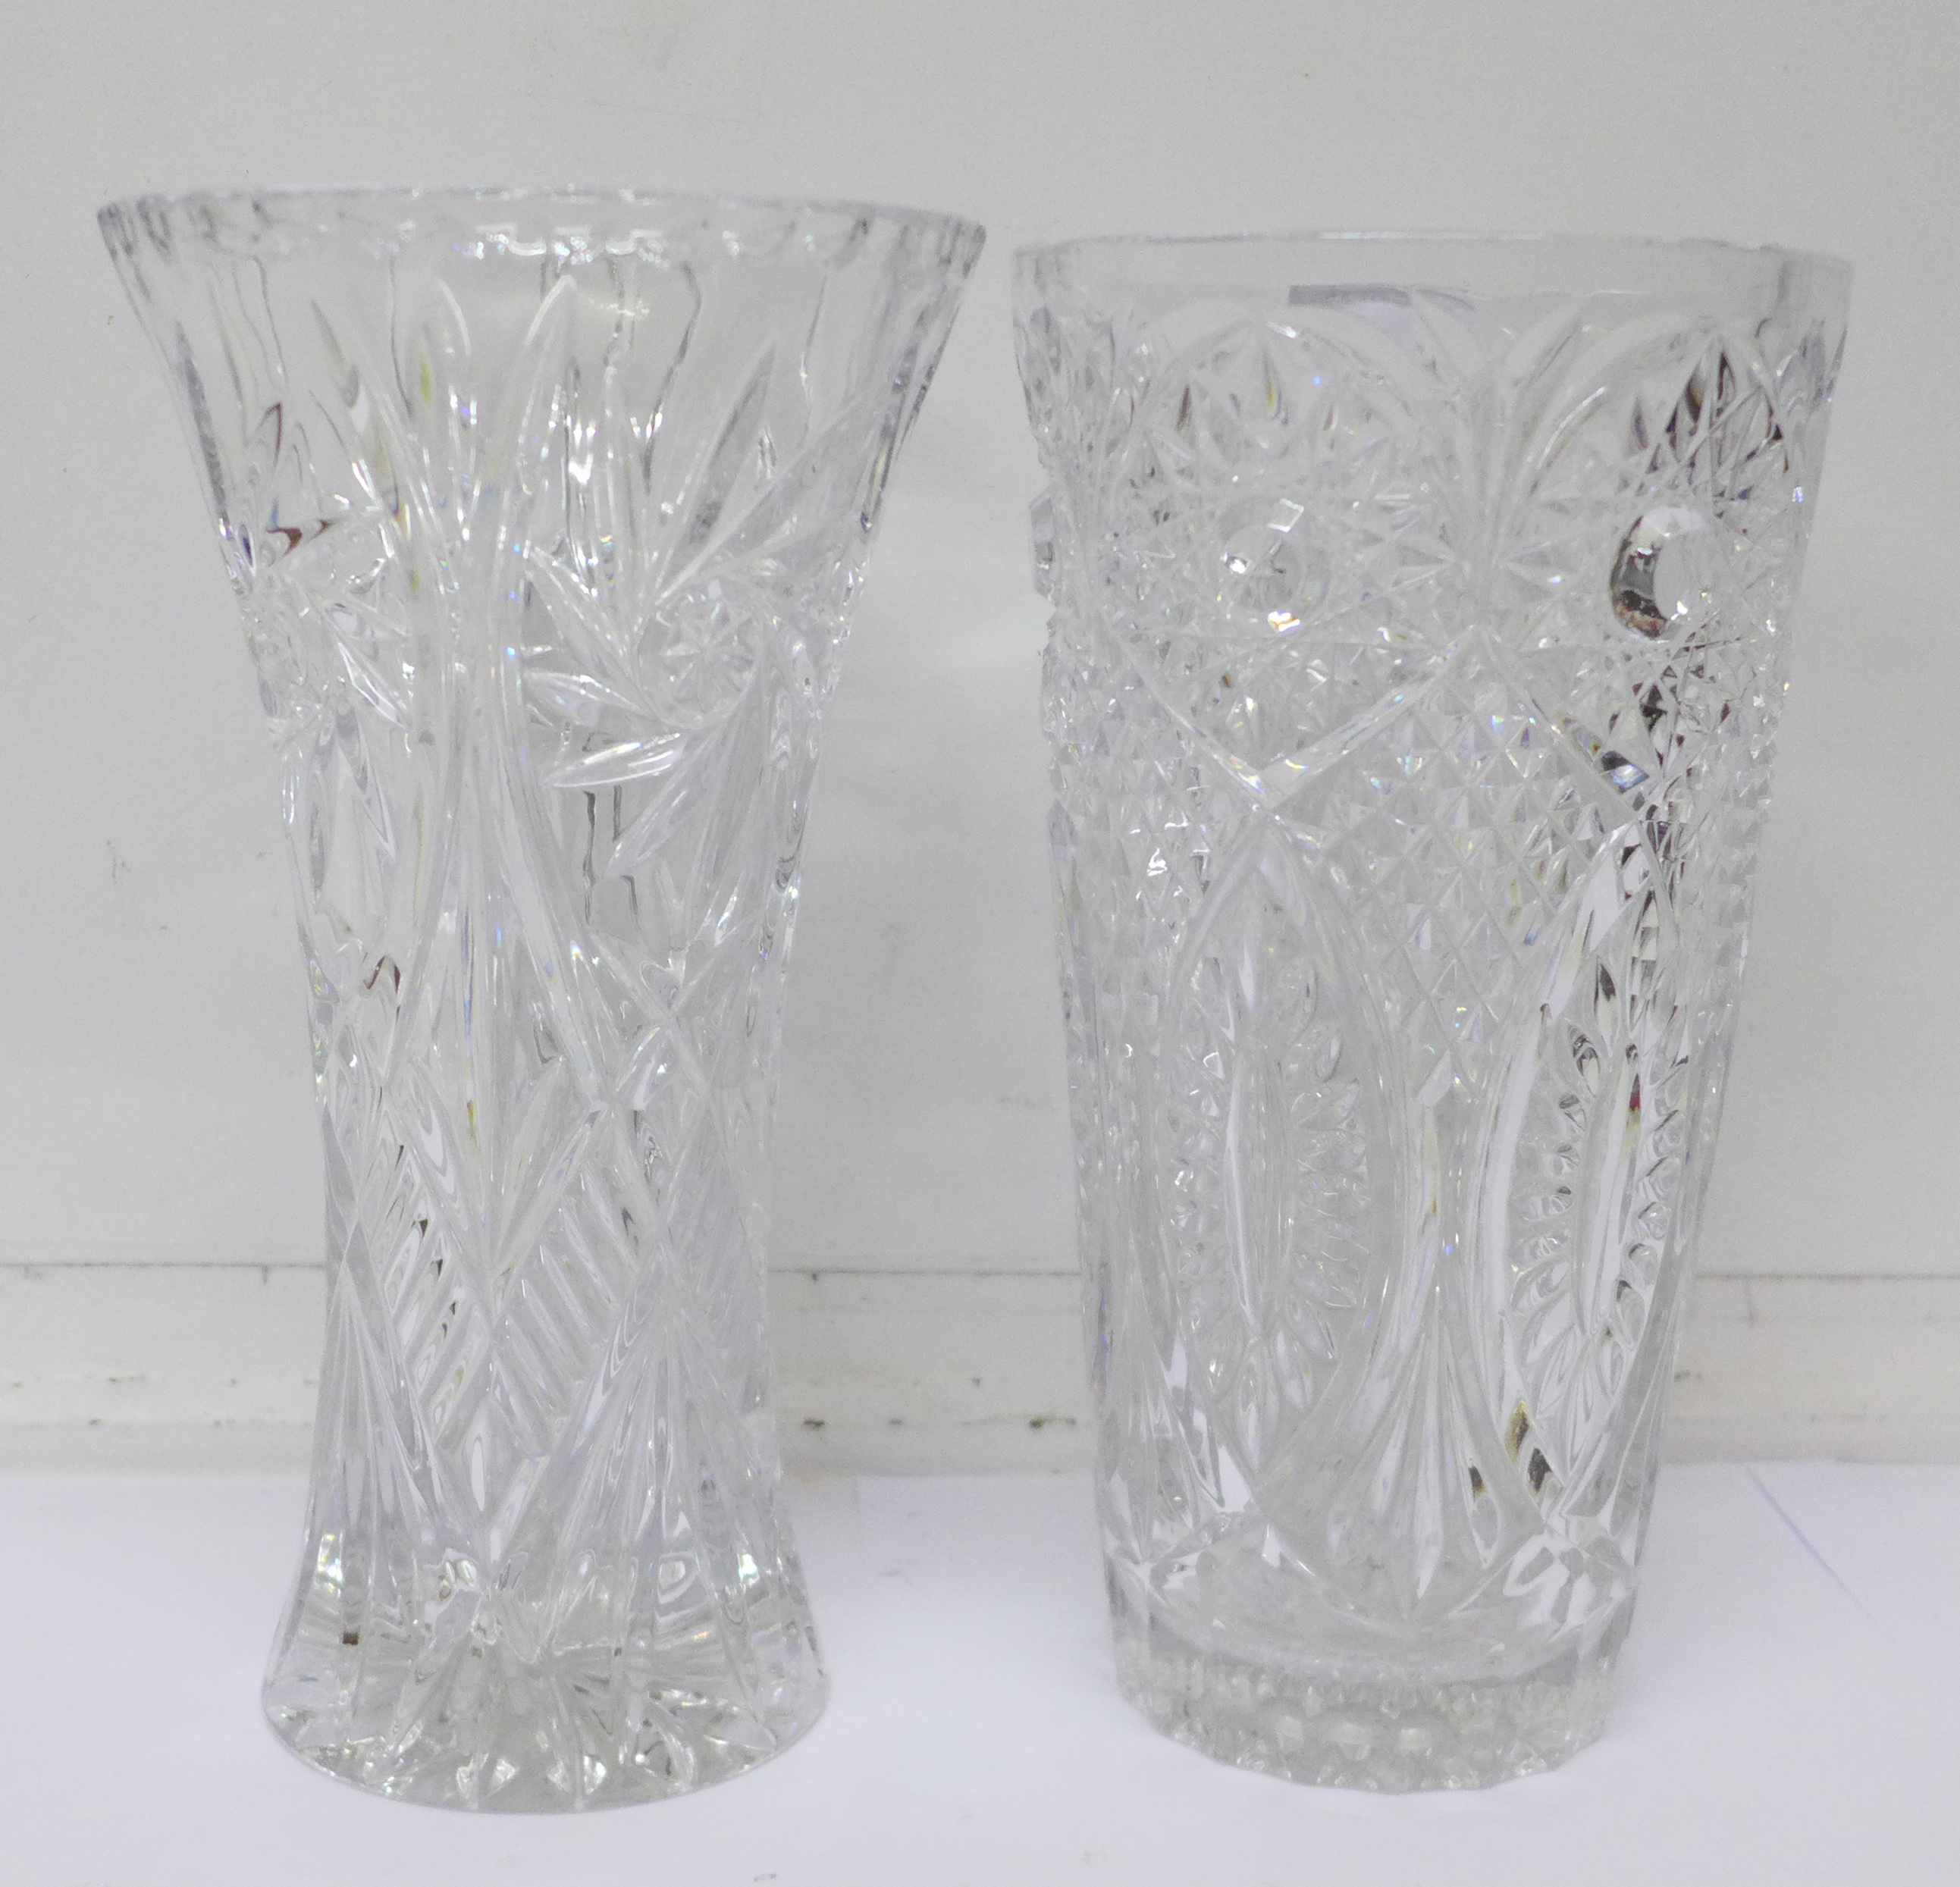 Two lead crystal glass vases